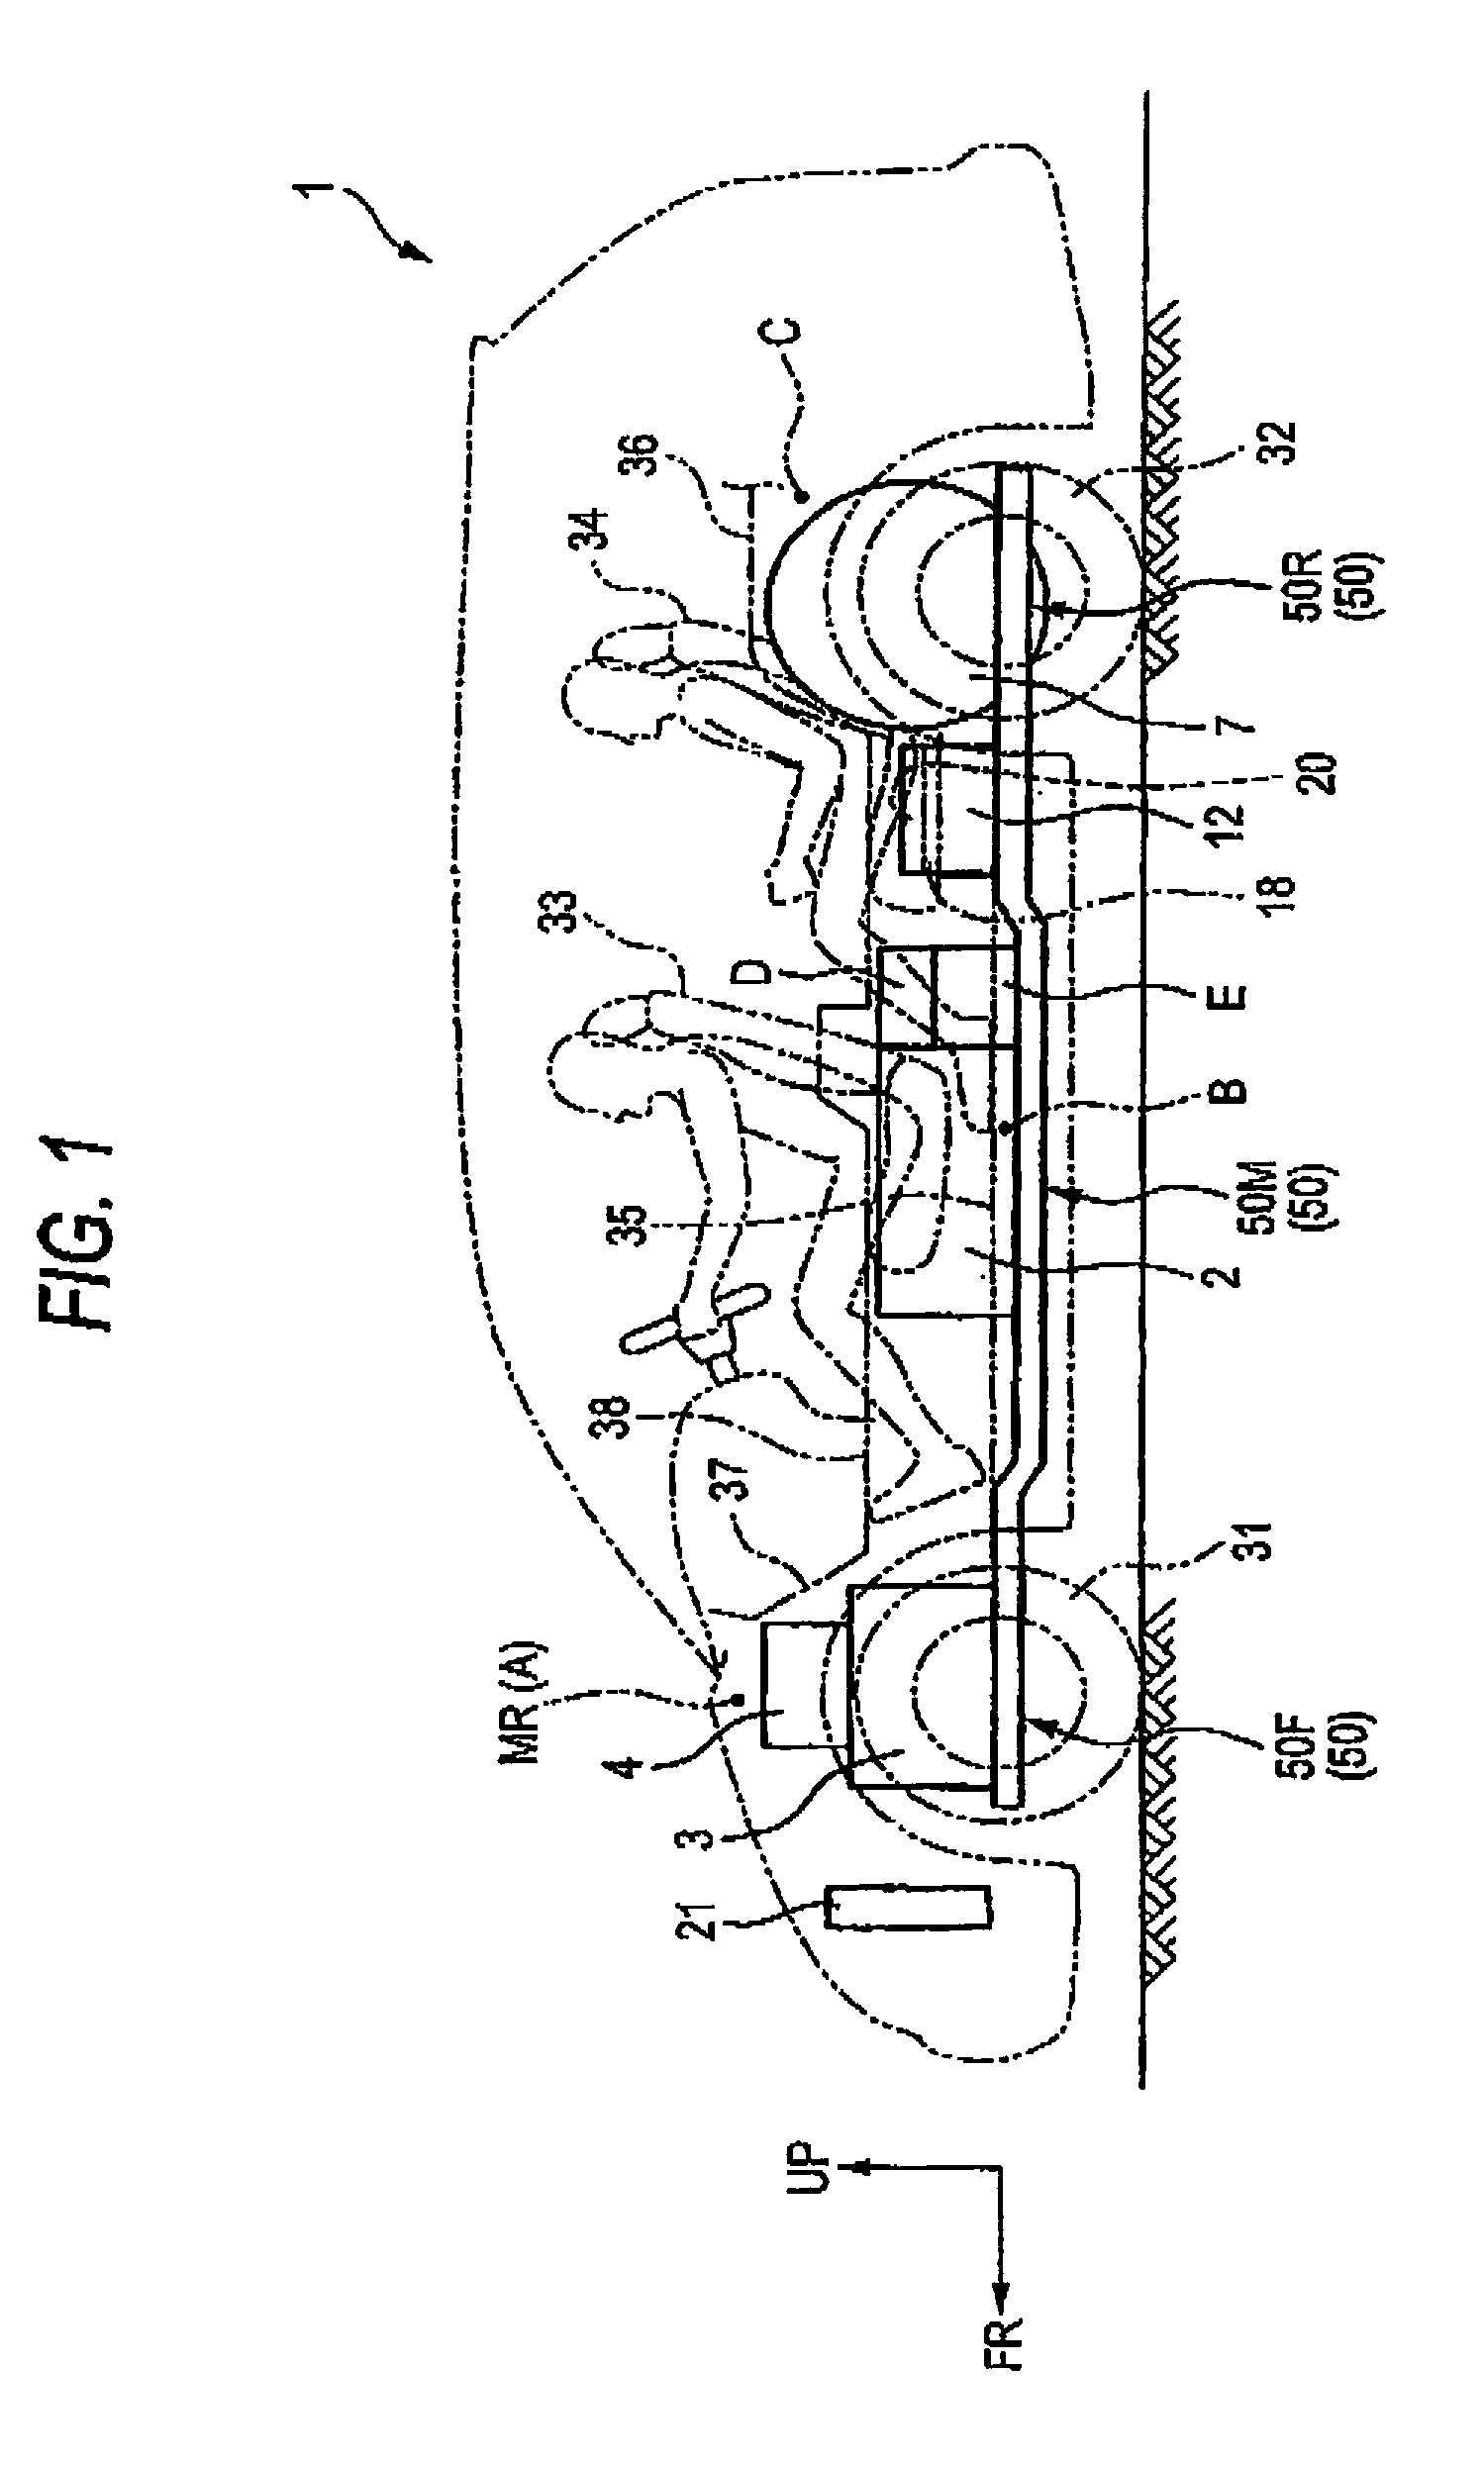 Vehicle mounted with electric storage apparatus